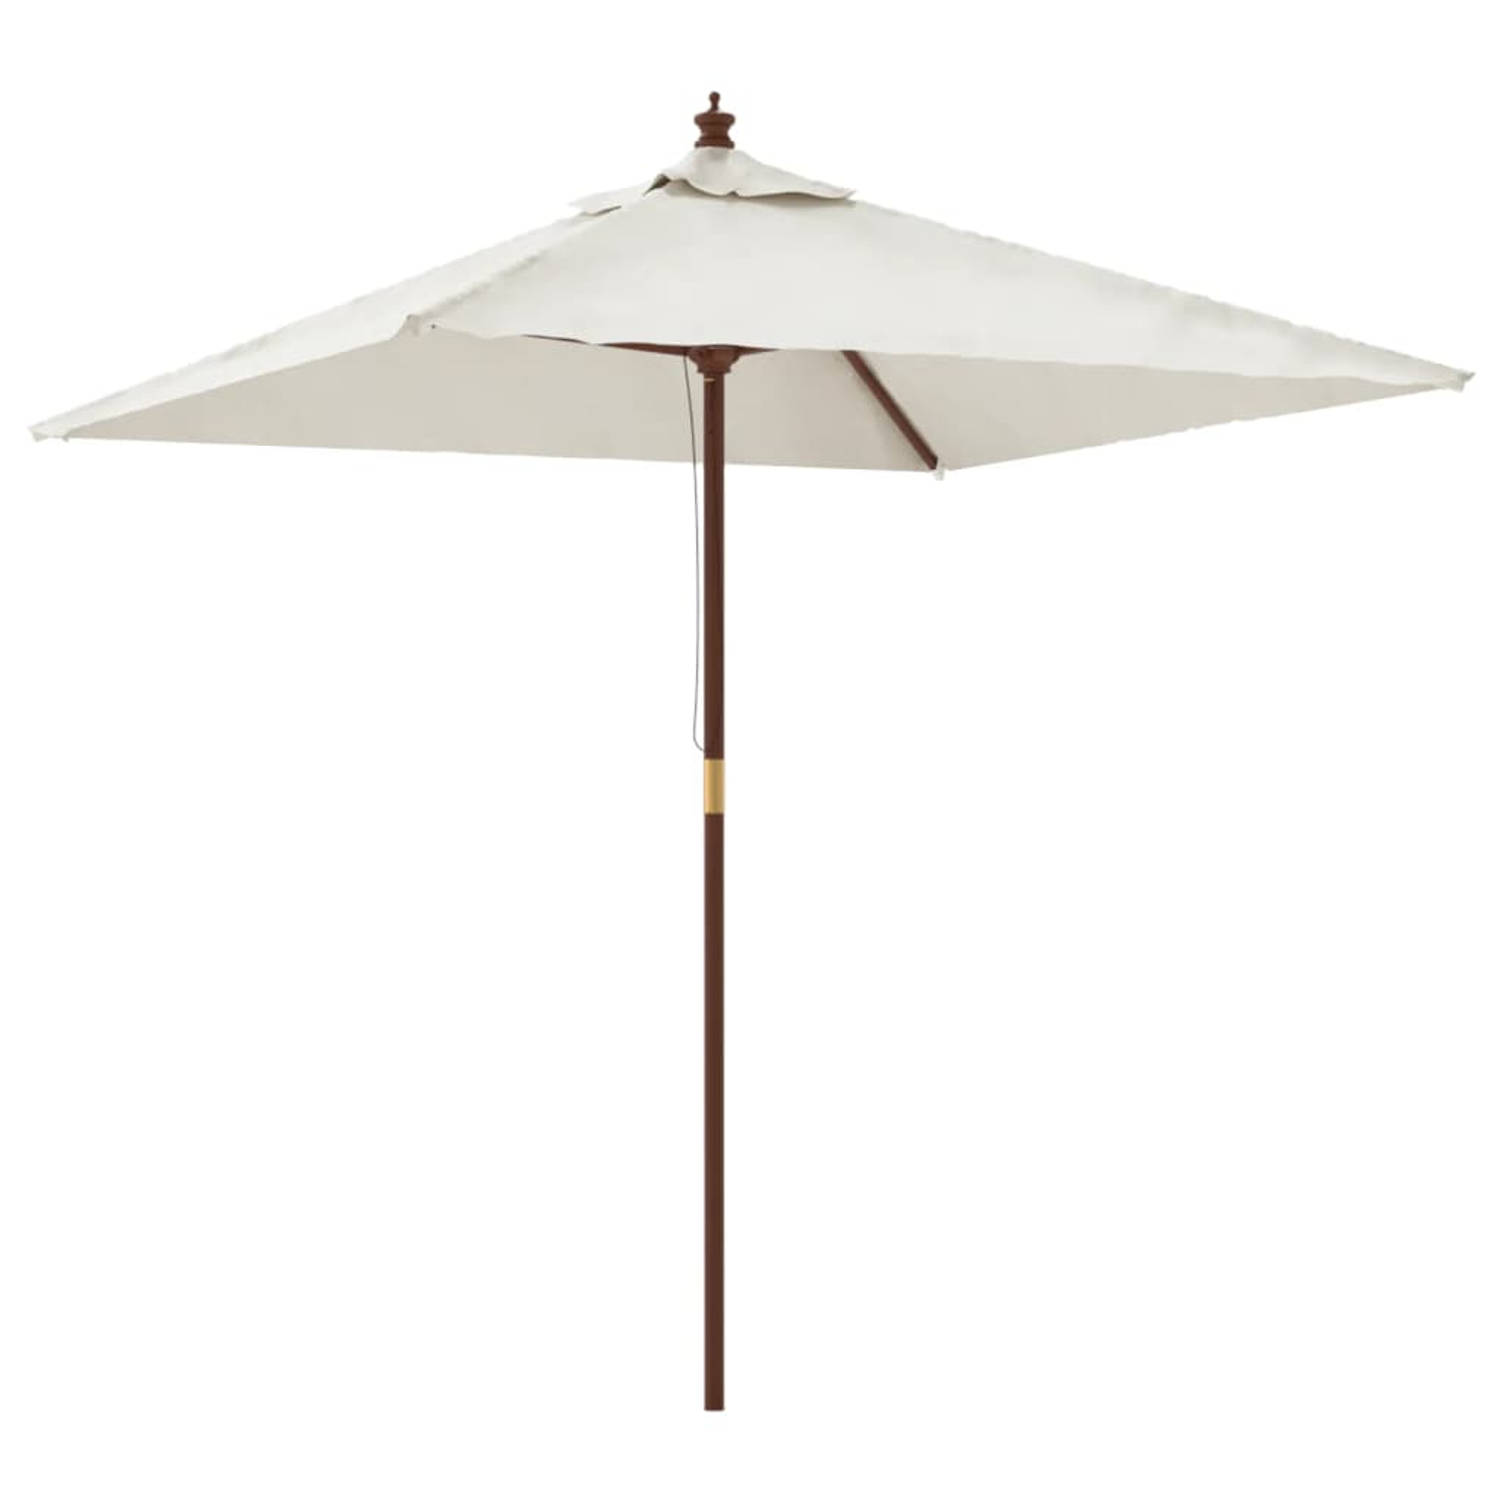 The Living Store Parasol Hardhout - 198 x 198 x 231 cm - Zand - Polyester